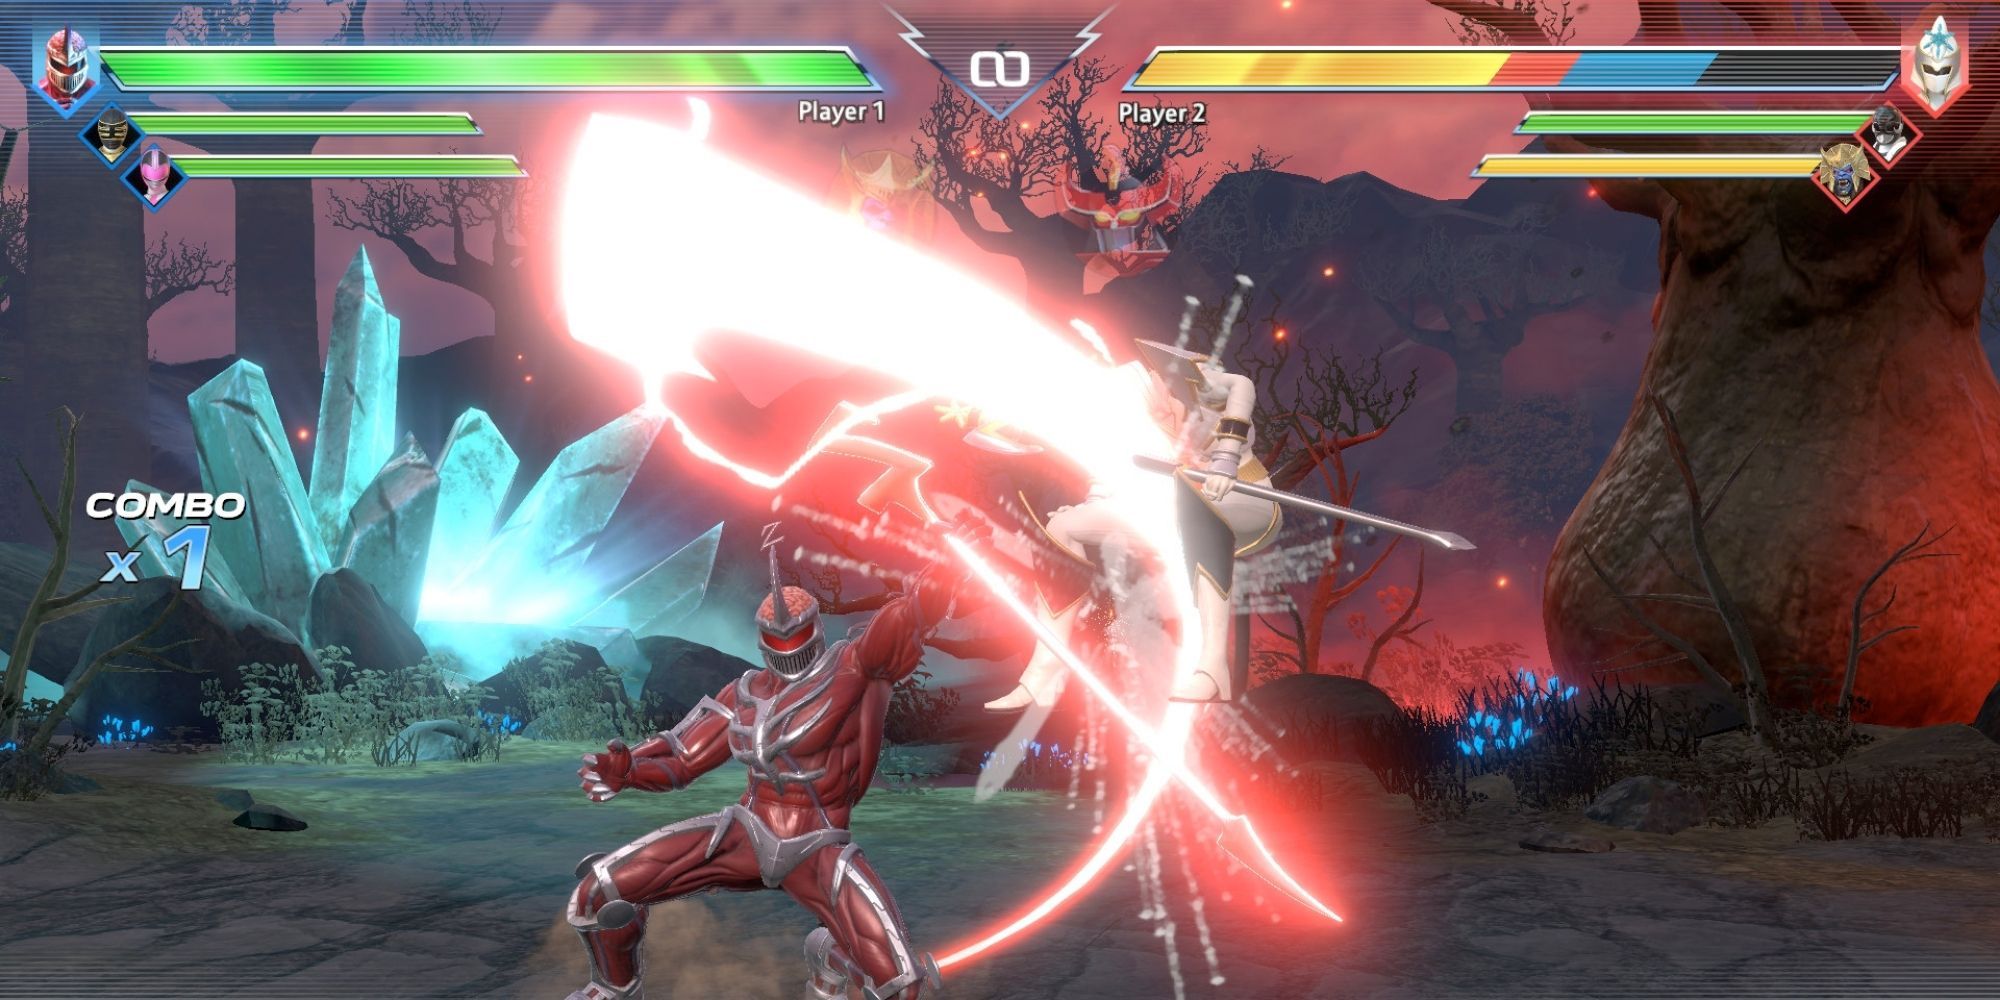 Zedd attacks Udonna with his staff in Power Rangers: Battle for the Grid 